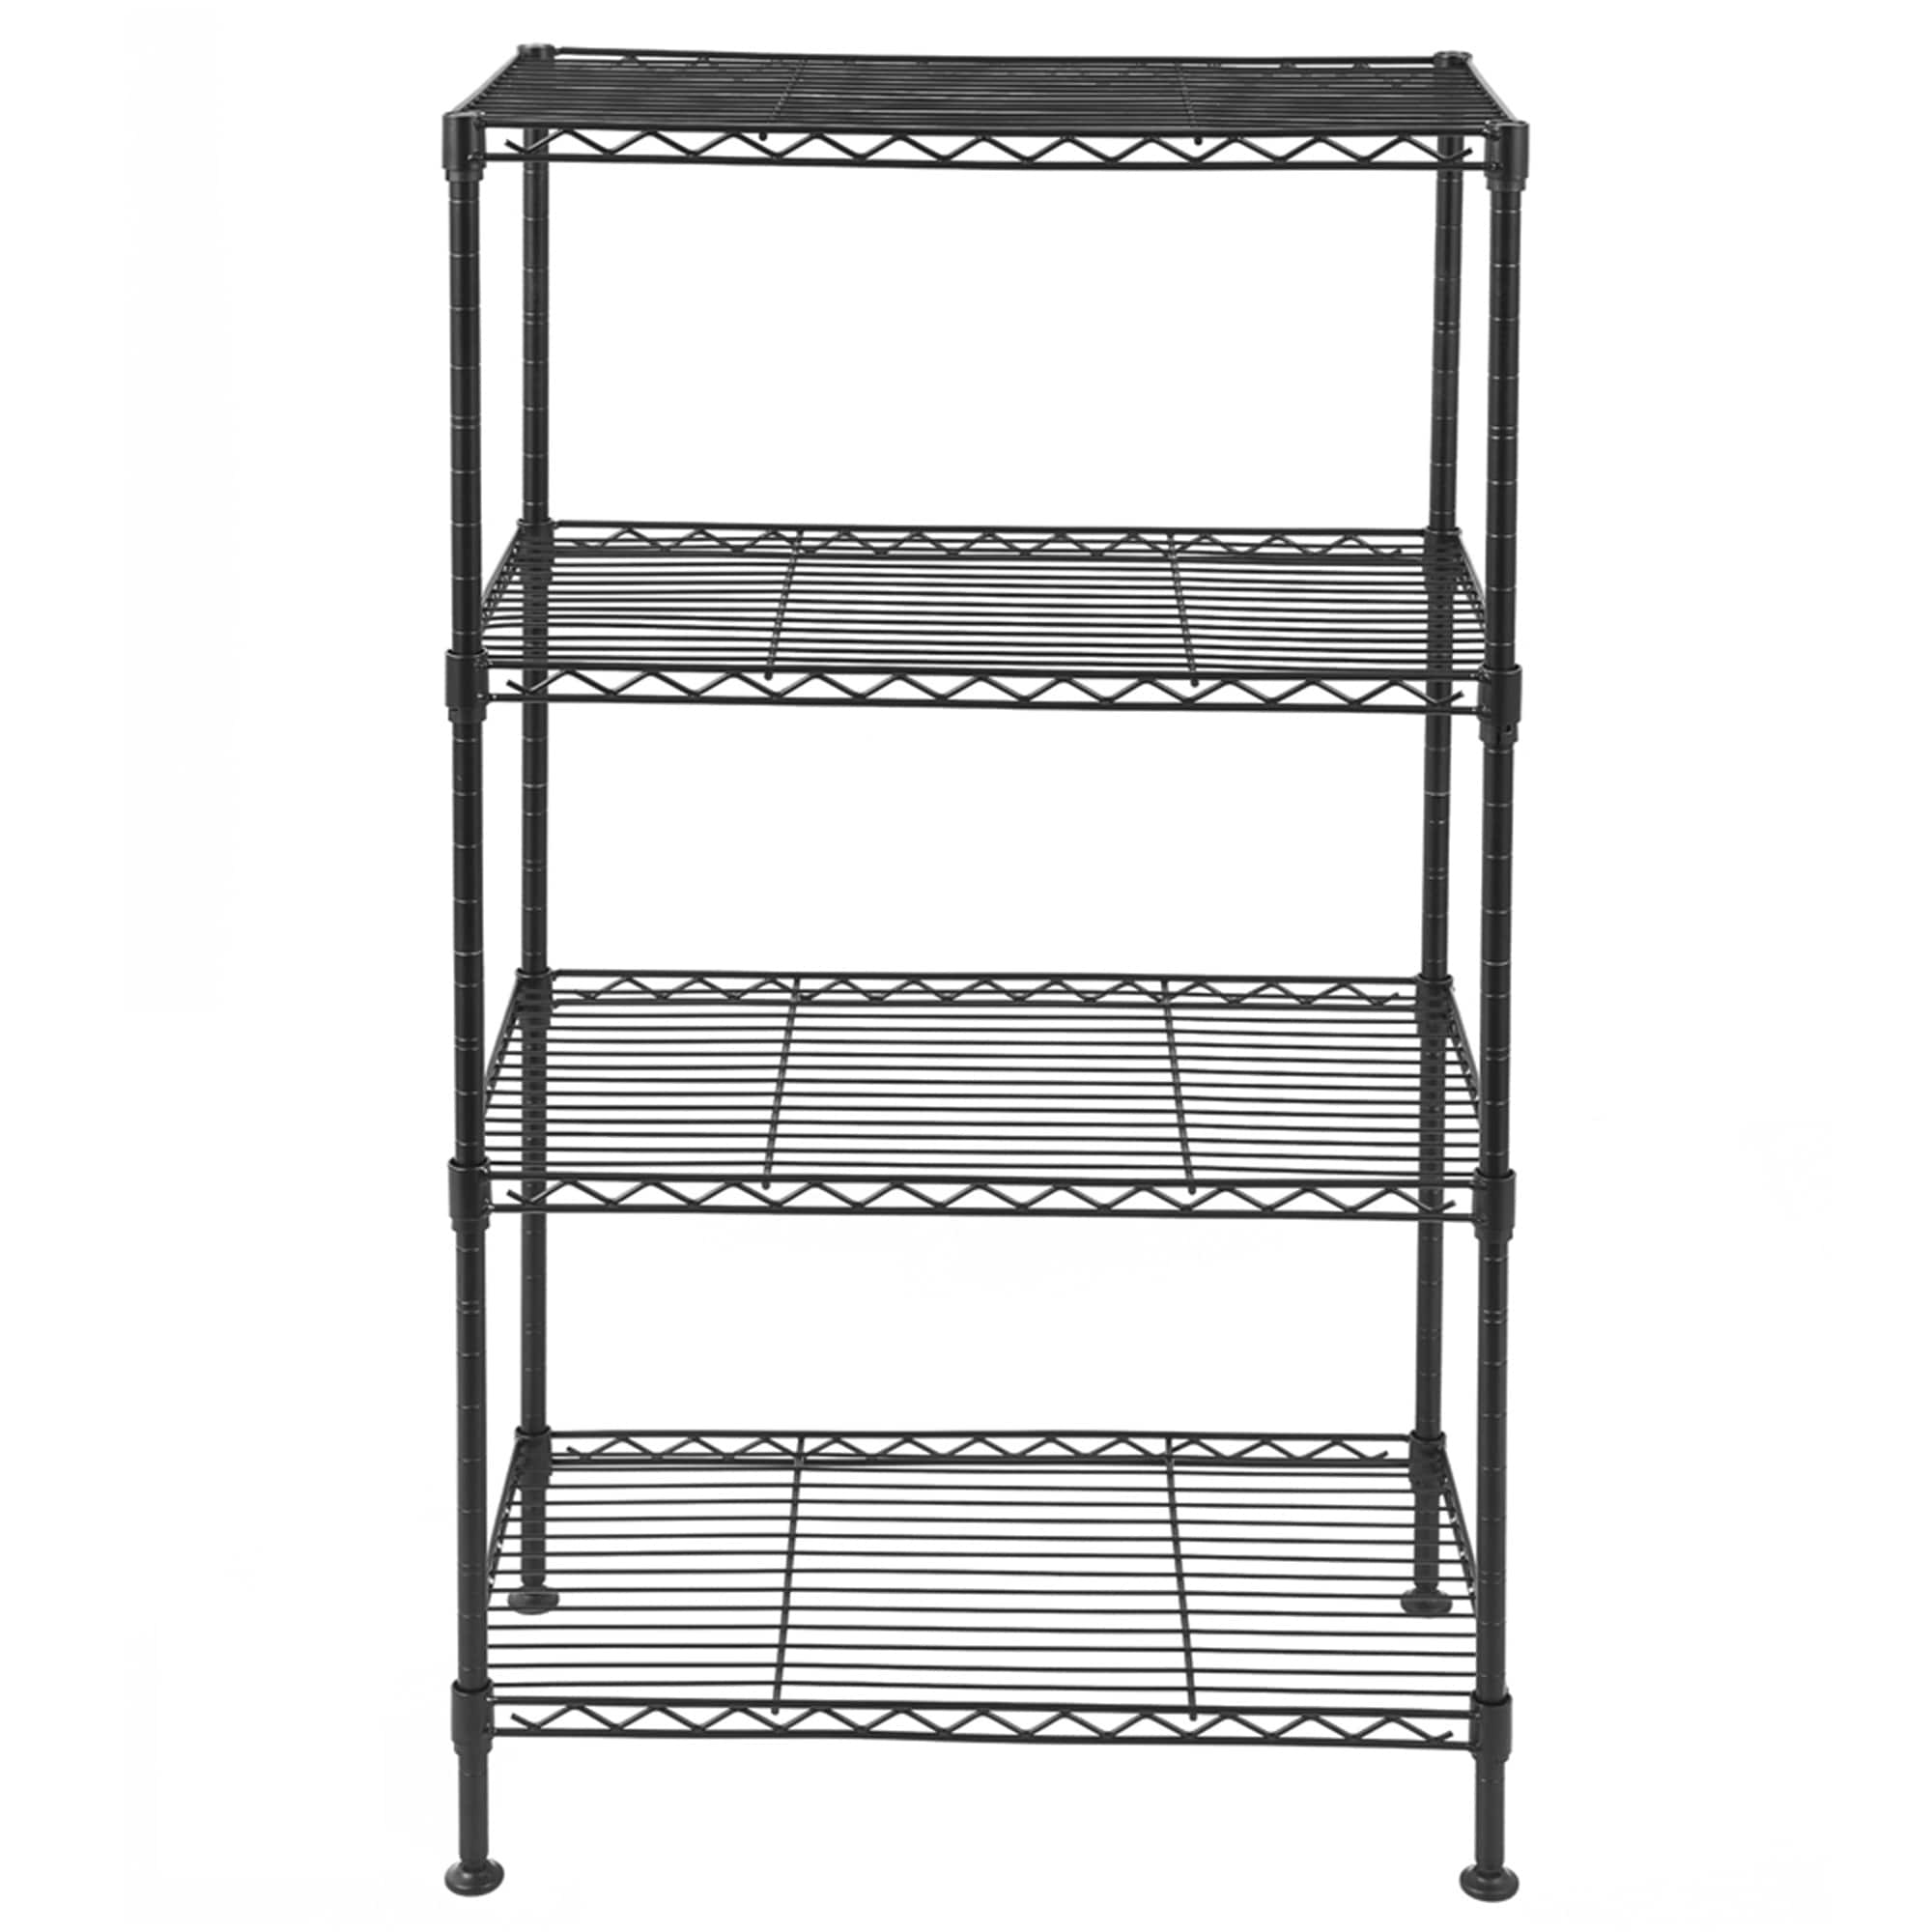 https://ak1.ostkcdn.com/images/products/is/images/direct/f9b259bf821a22132c0de1da2a3631fc1fd8d648/4-Tier-Welded-Wire-Shelving-Shoes-Rack.jpg